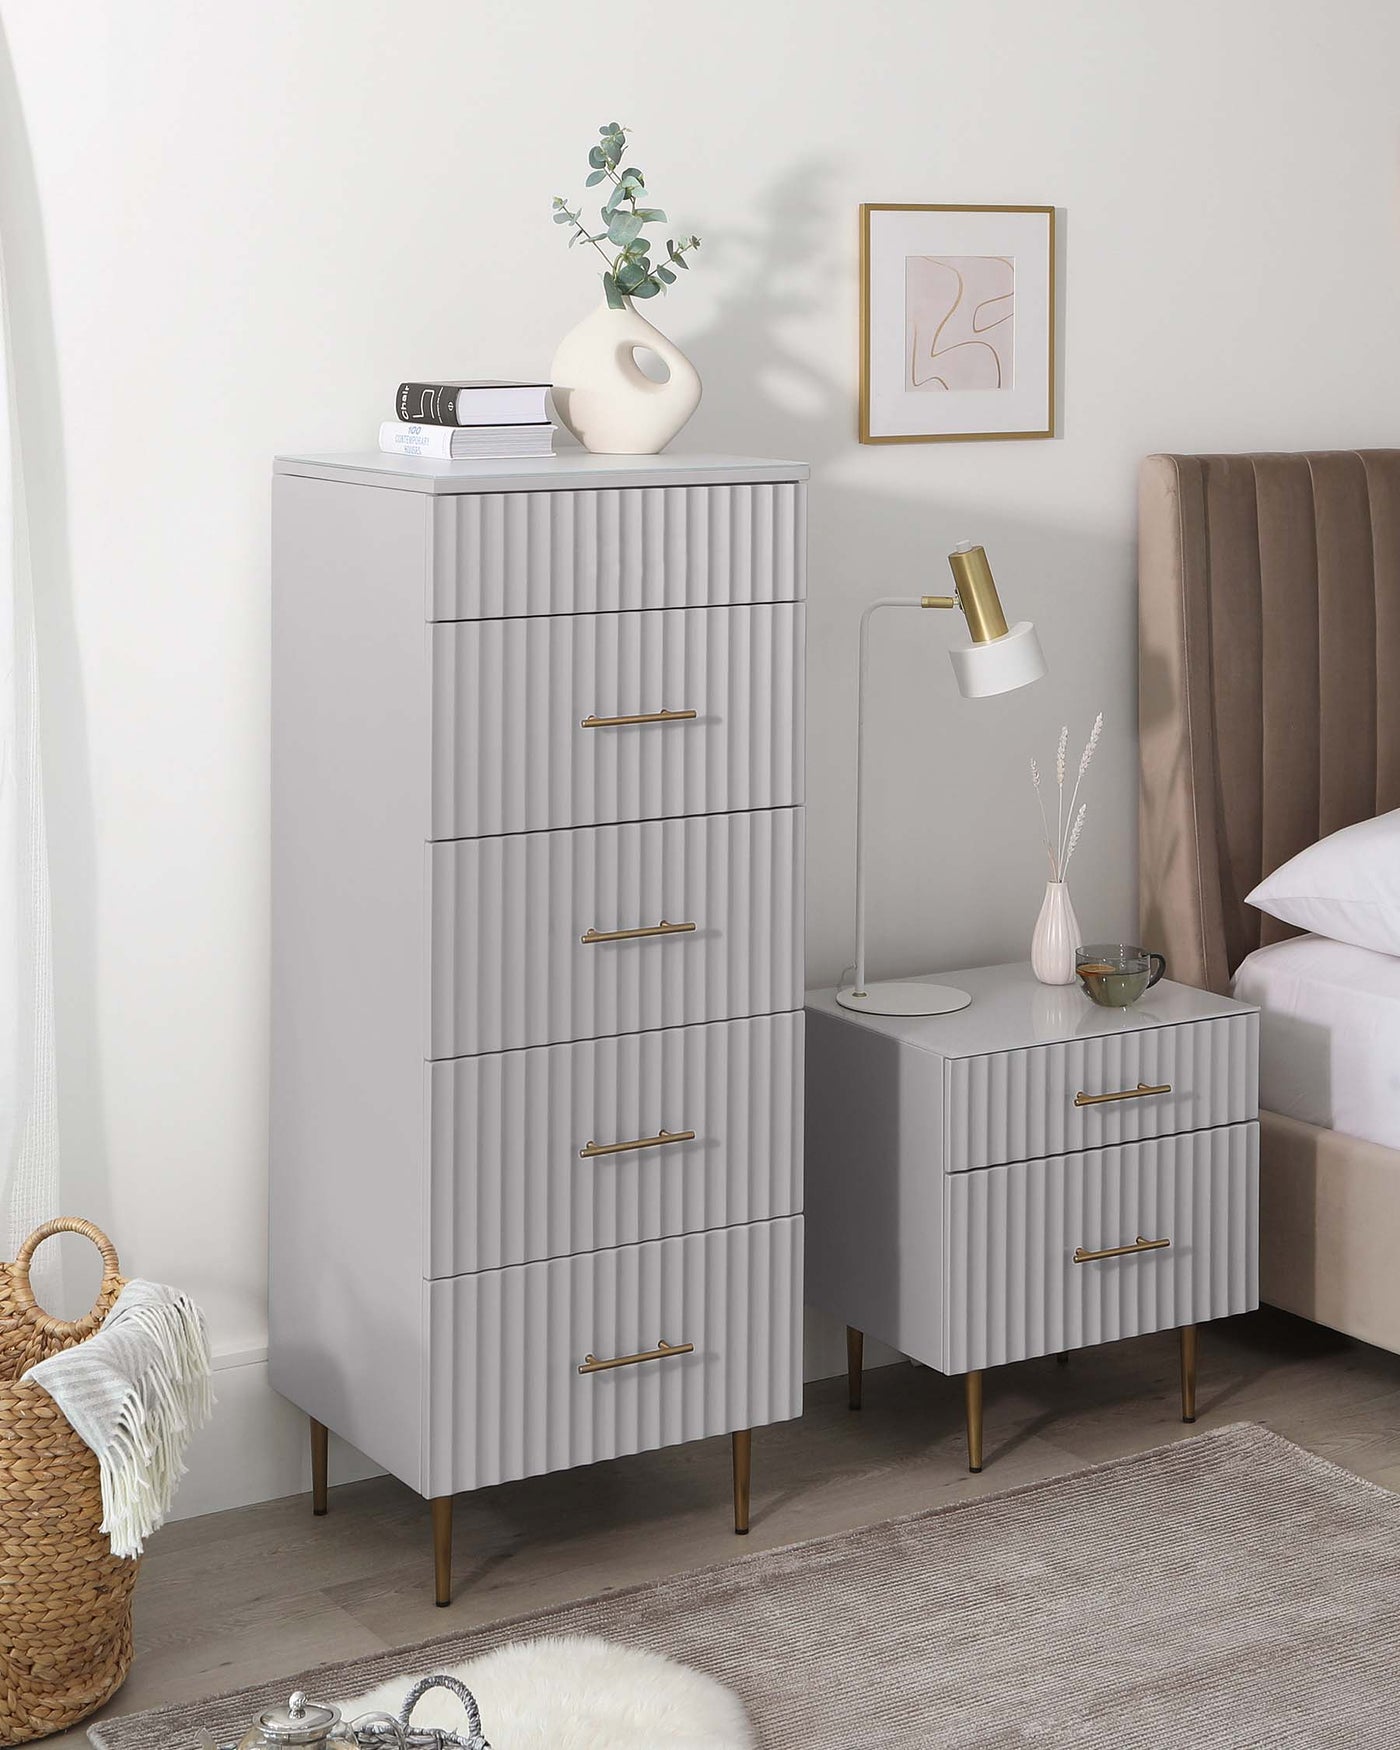 Modern bedroom furniture set featuring a tall, light grey, 5-drawer dresser with embossed front panels and brass handles, and a matching 3-drawer nightstand. Both pieces have splayed, tapered wooden legs.